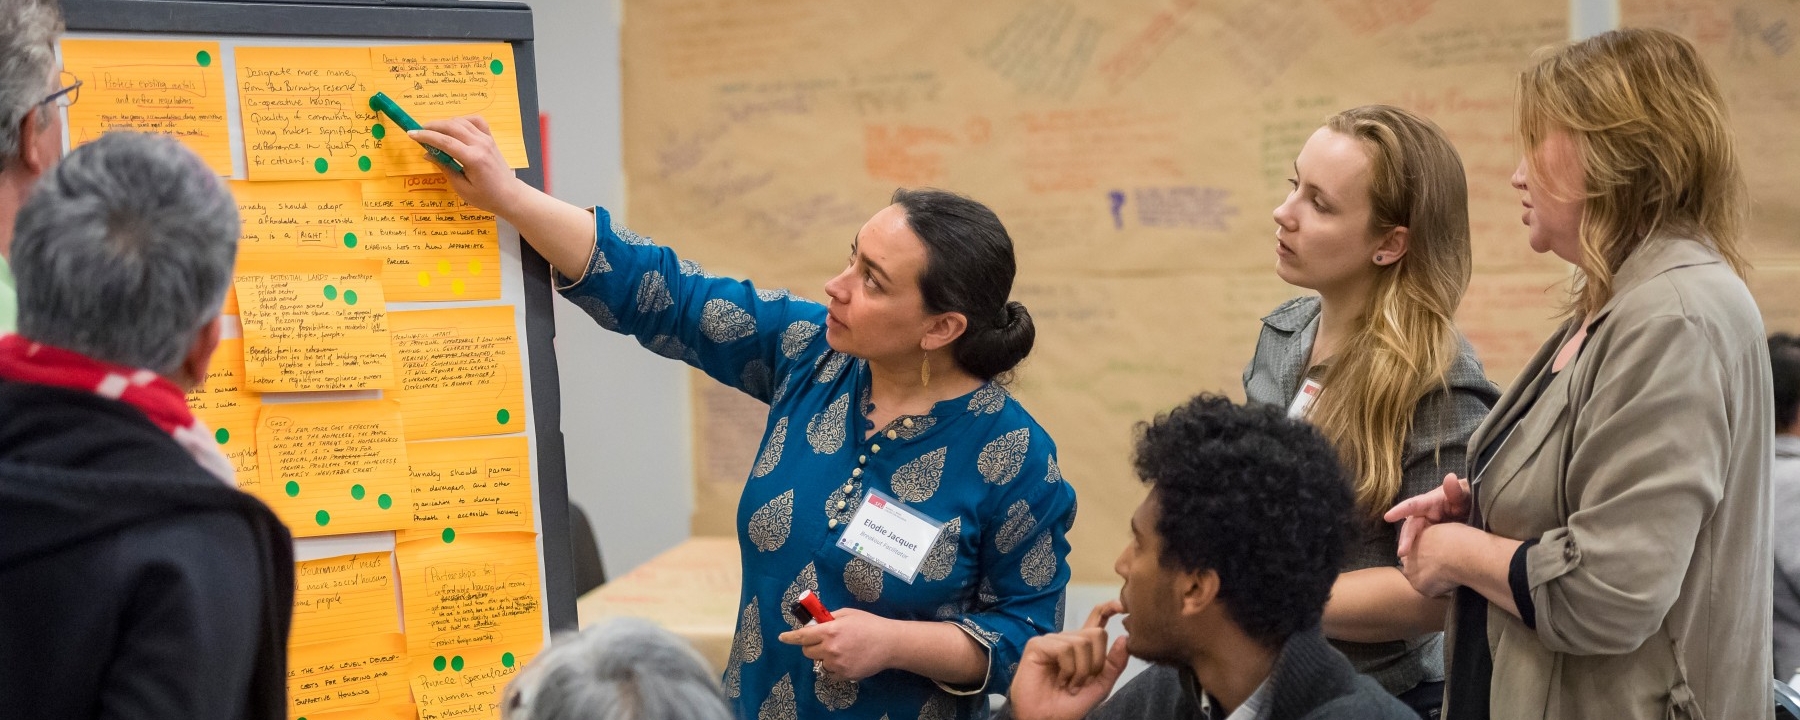 A facilitator points to a whiteboard covered in sticky notes as she speaks to dialogue participants